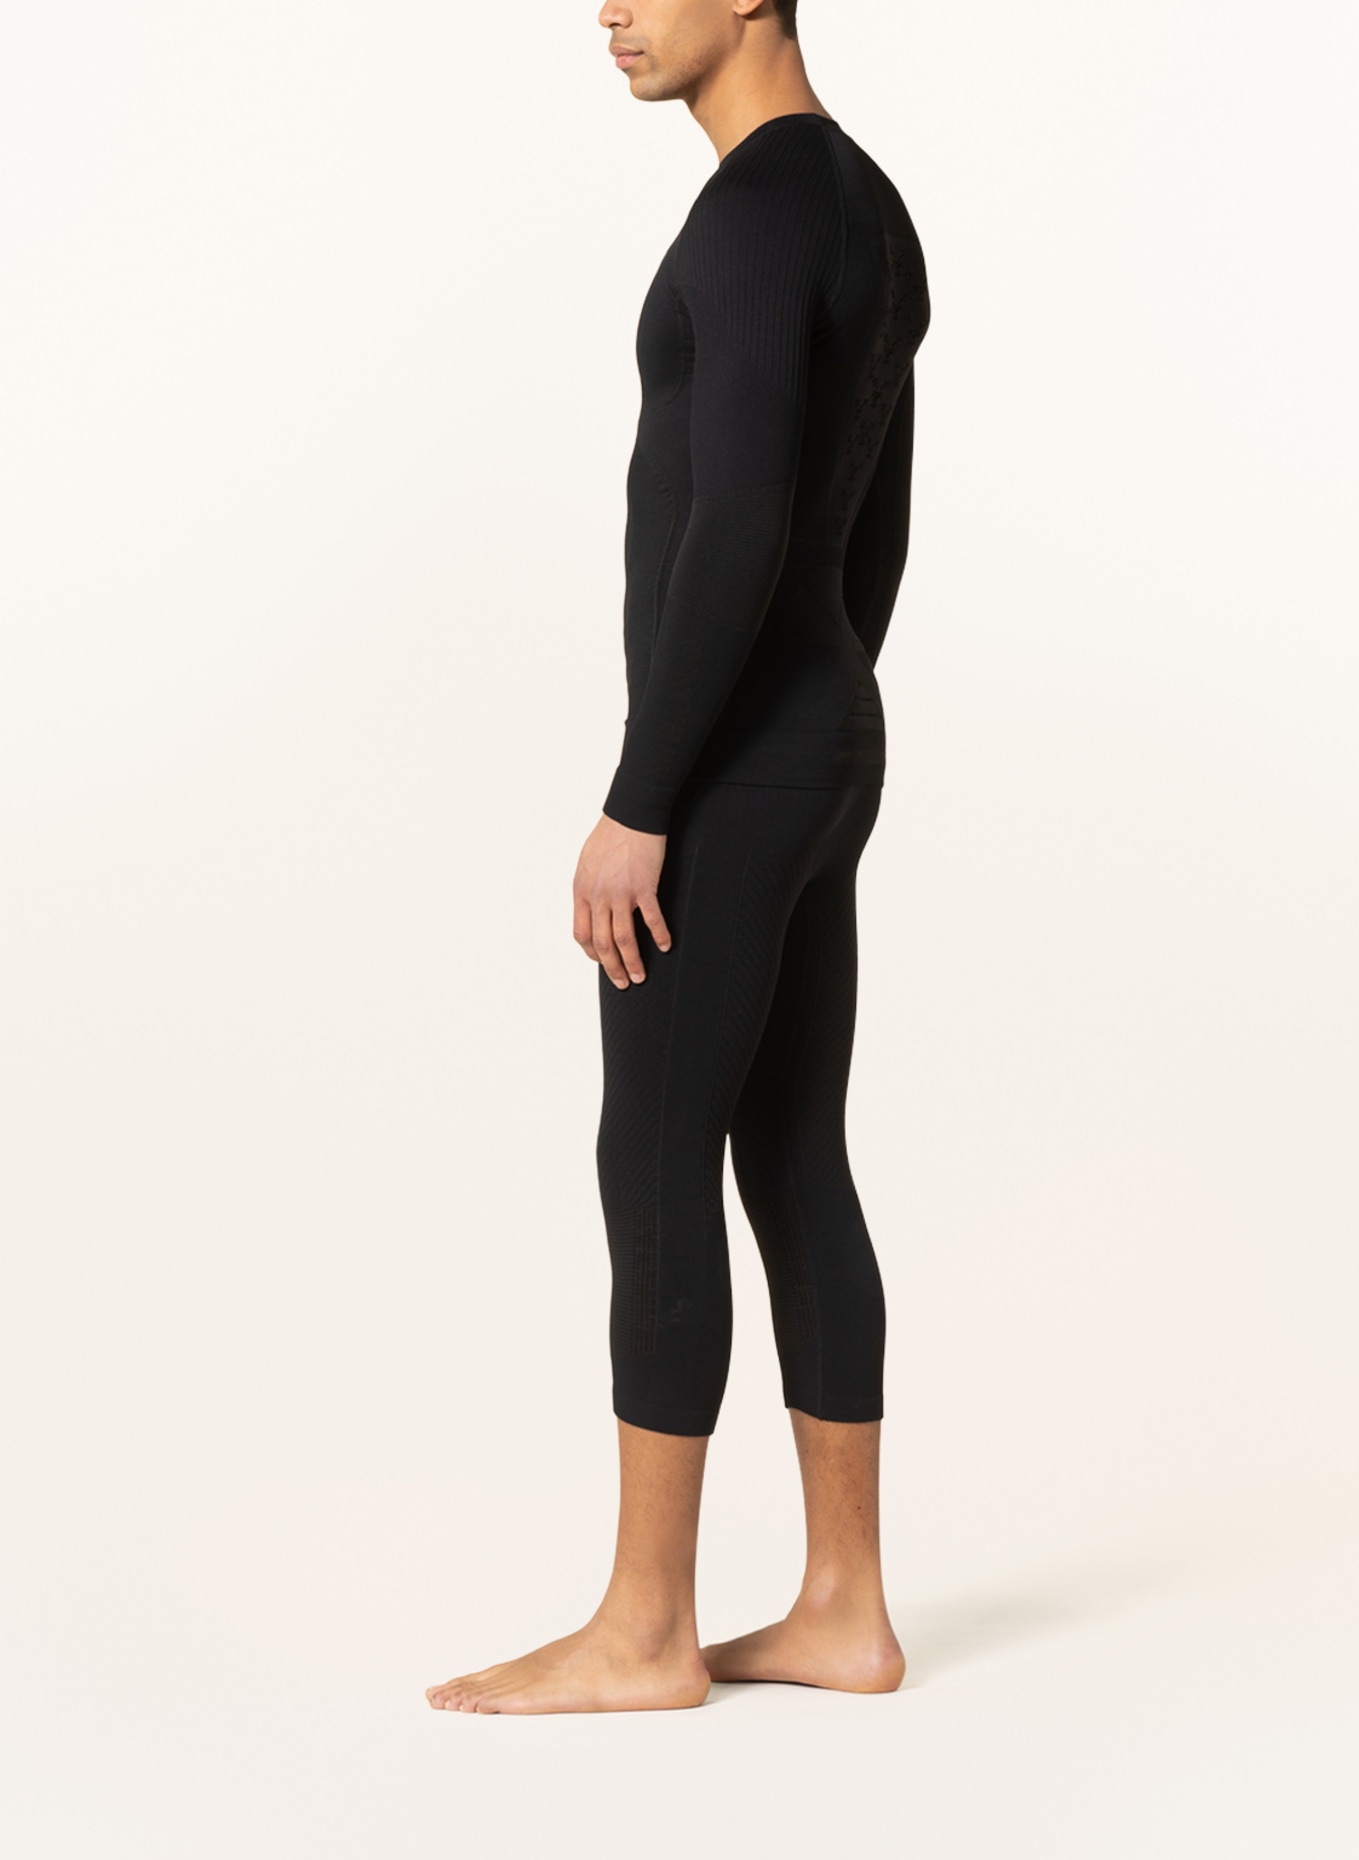 X-BIONIC Functional baselayer trousers ENERGY ACCUMULATOR® 4.0 with cropped leg length, Color: BLACK (Image 4)